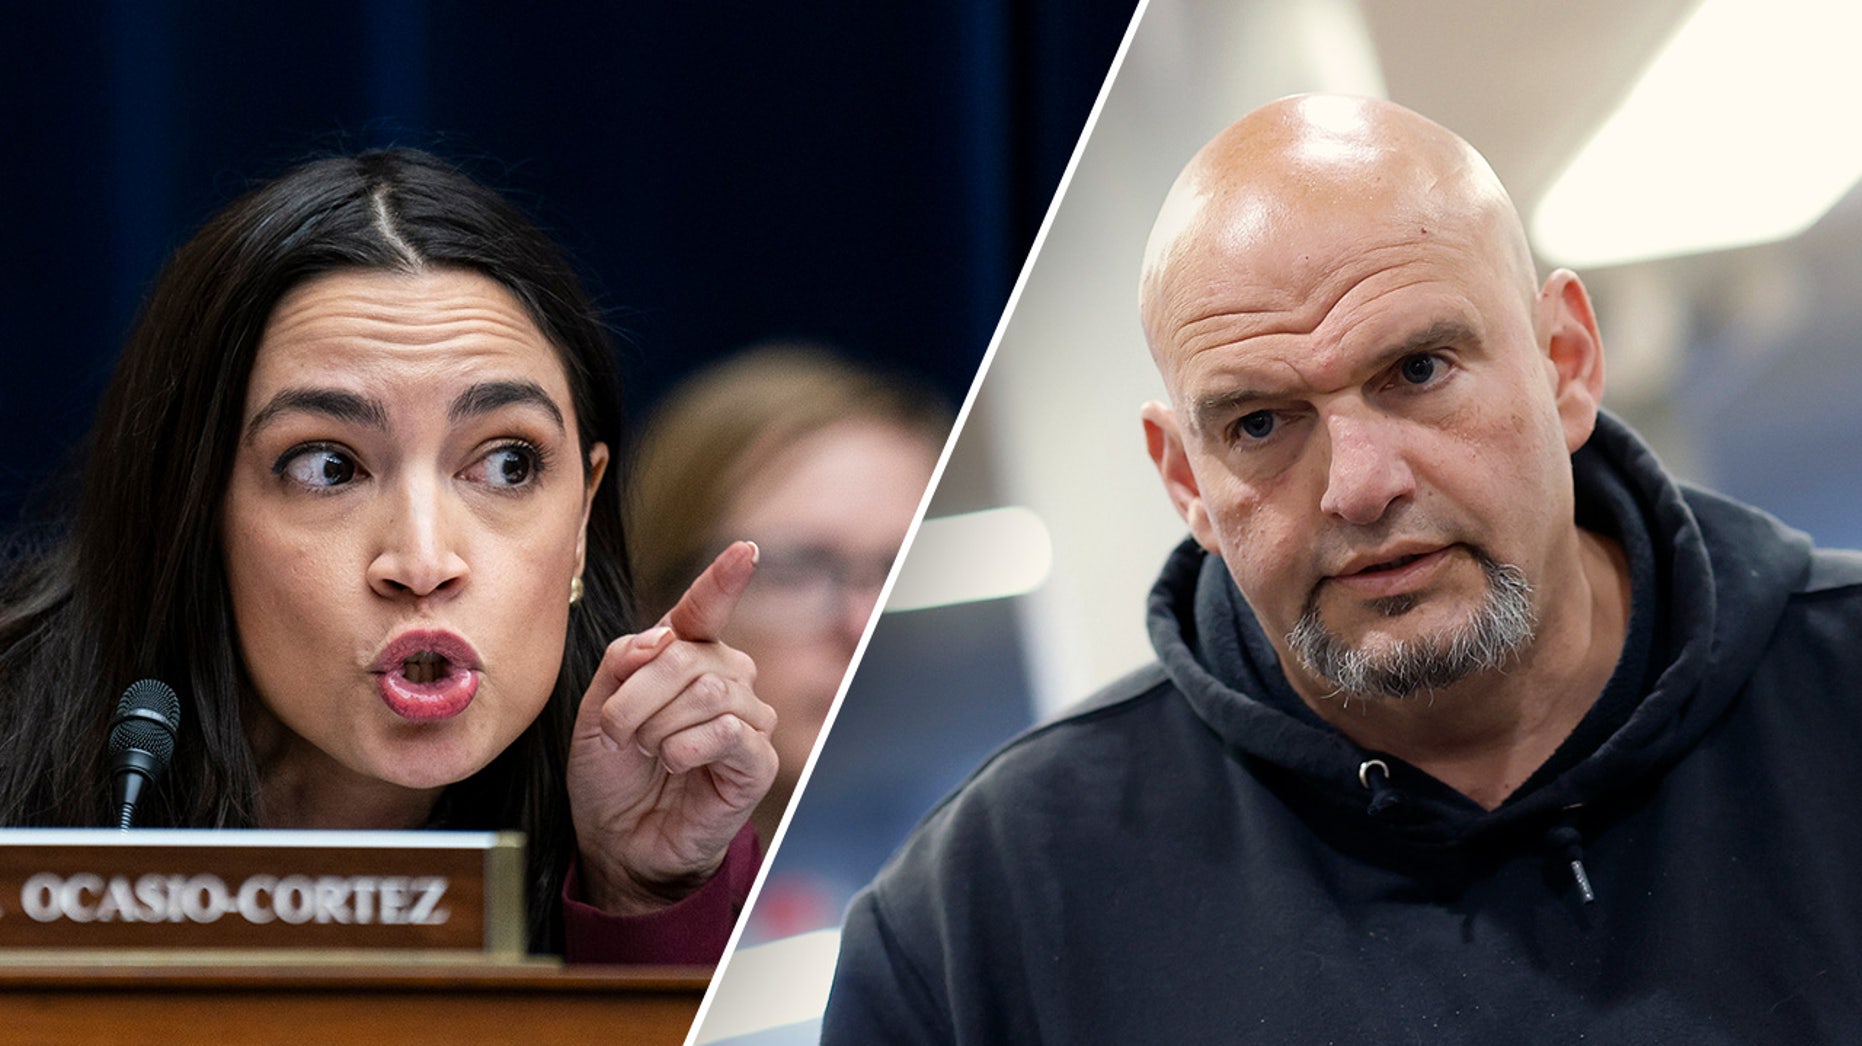 AOC takes aim at Fetterman for comparing House to ‘Jerry Springer’ after hearing blowup